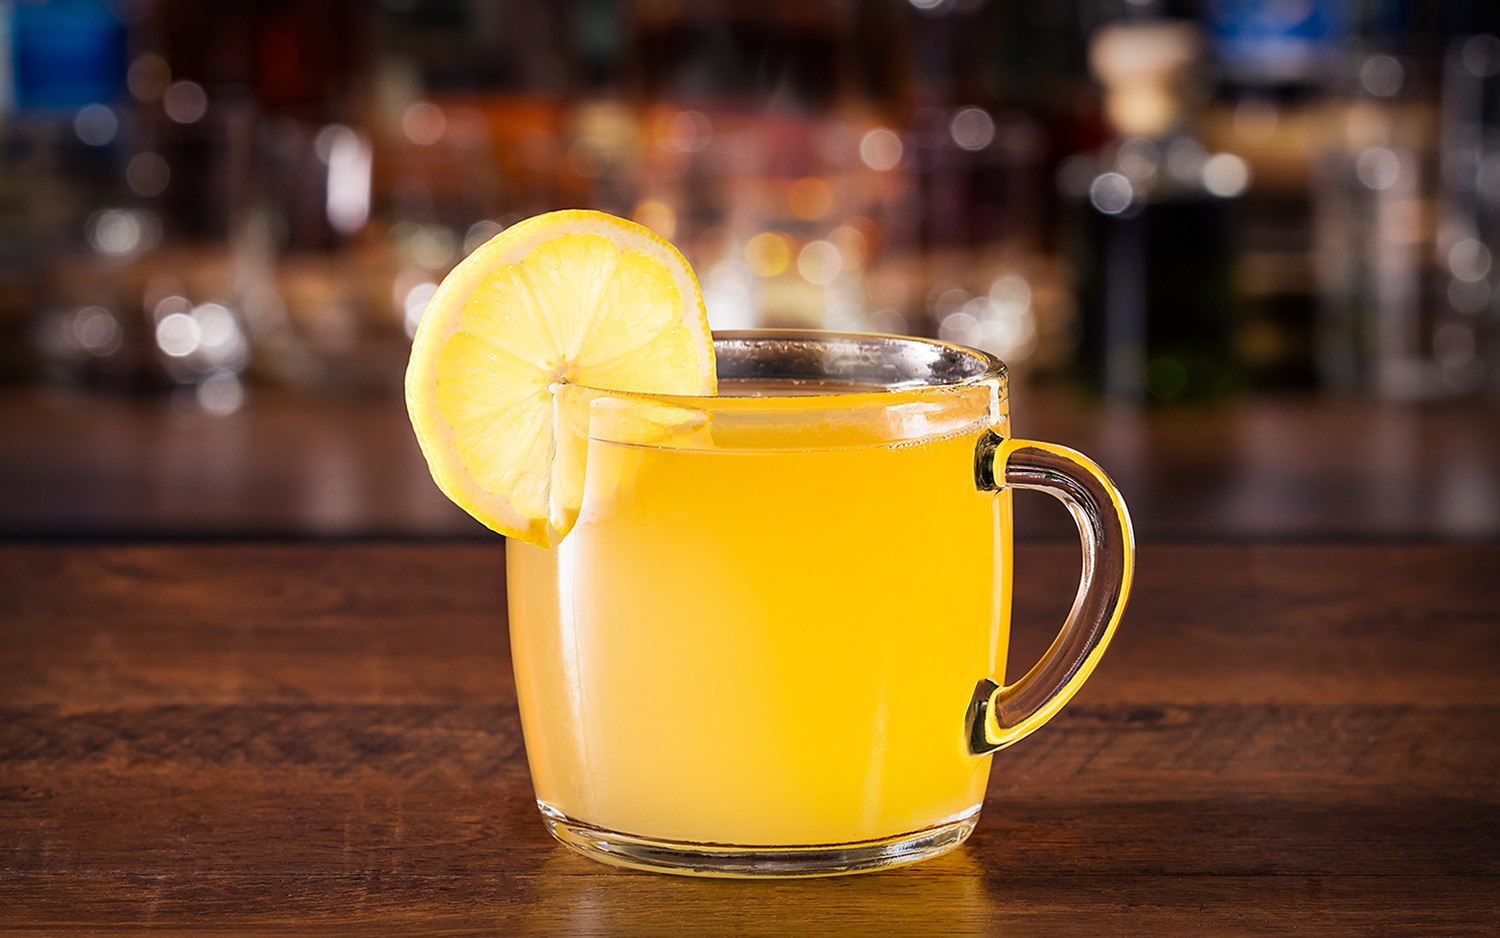 How to Make a Hot Toddy